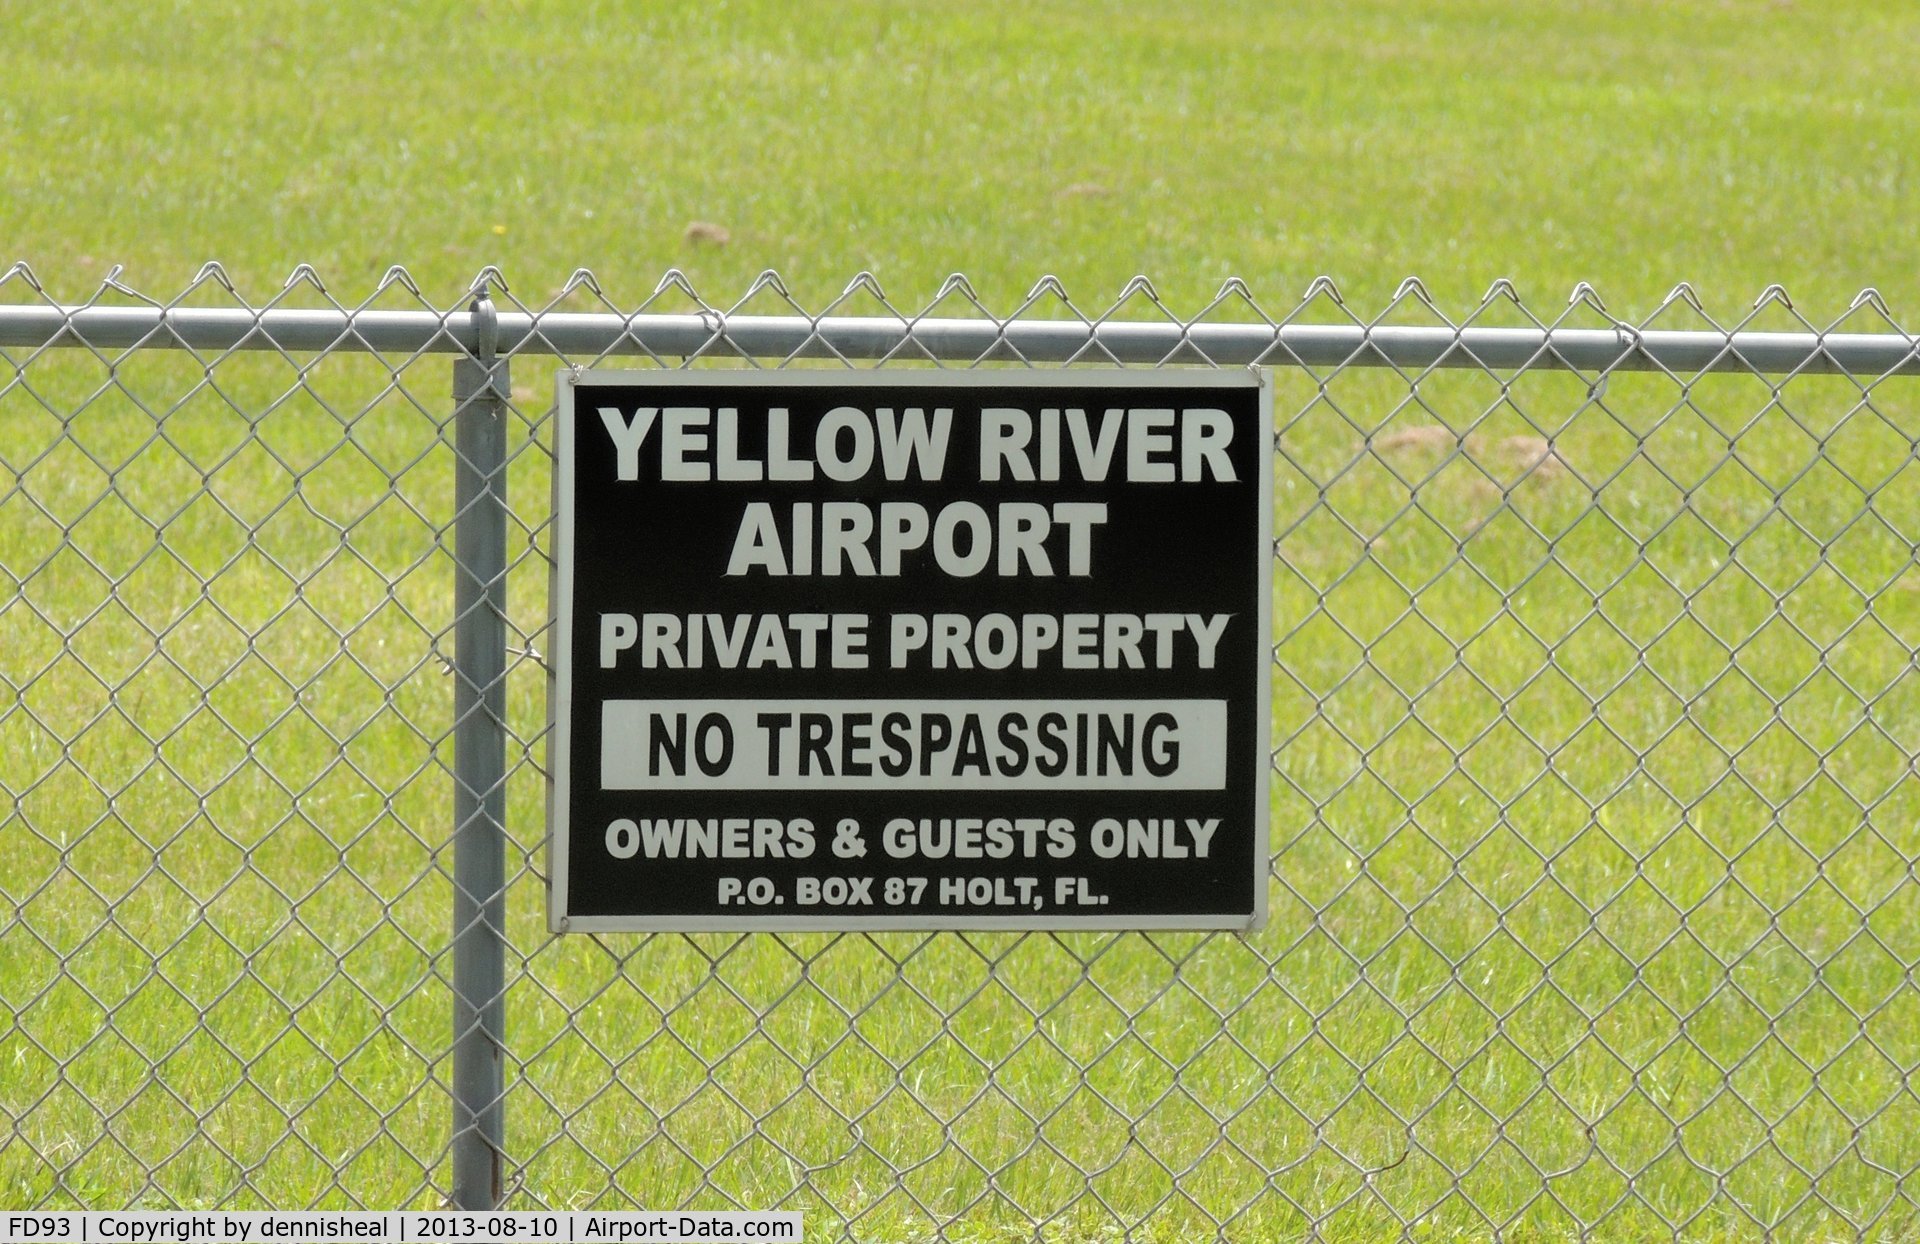 Yellow River Airstrip Airport (FD93) - SIGN ON FENCE AT AIRPORT